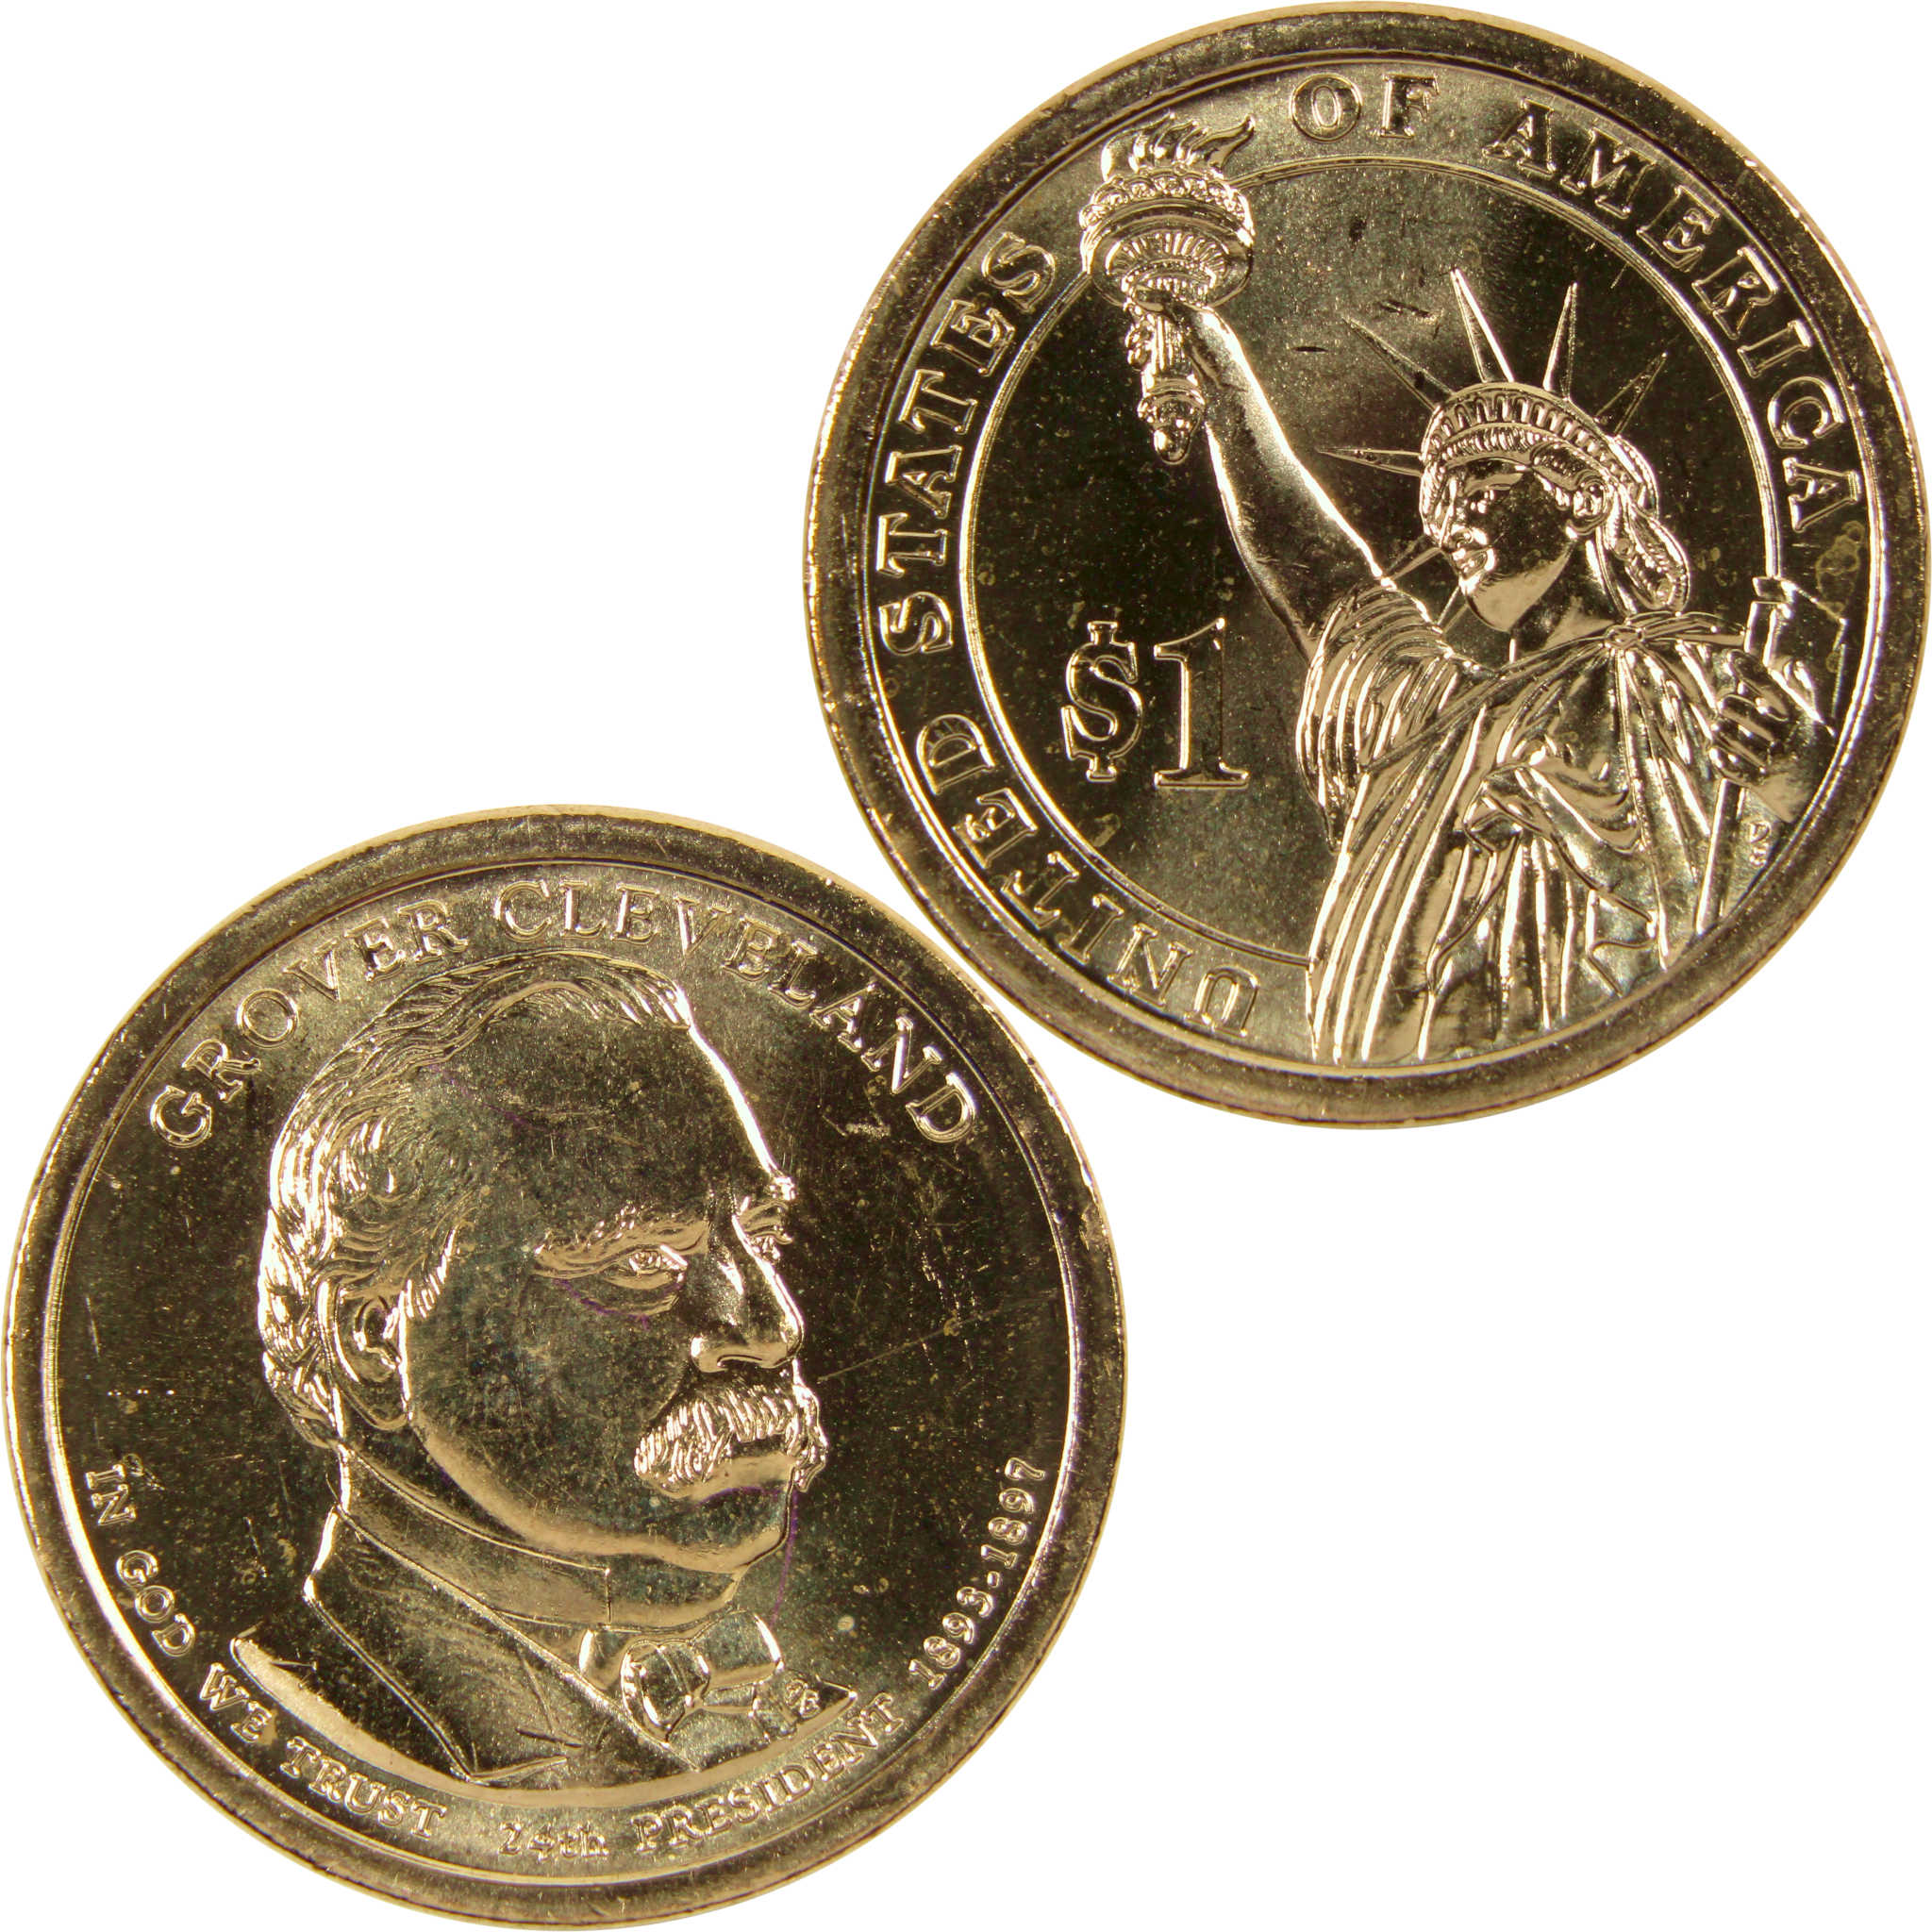 2012 P Grover Cleveland 2nd Term Presidential Dollar Uncirculated Coin